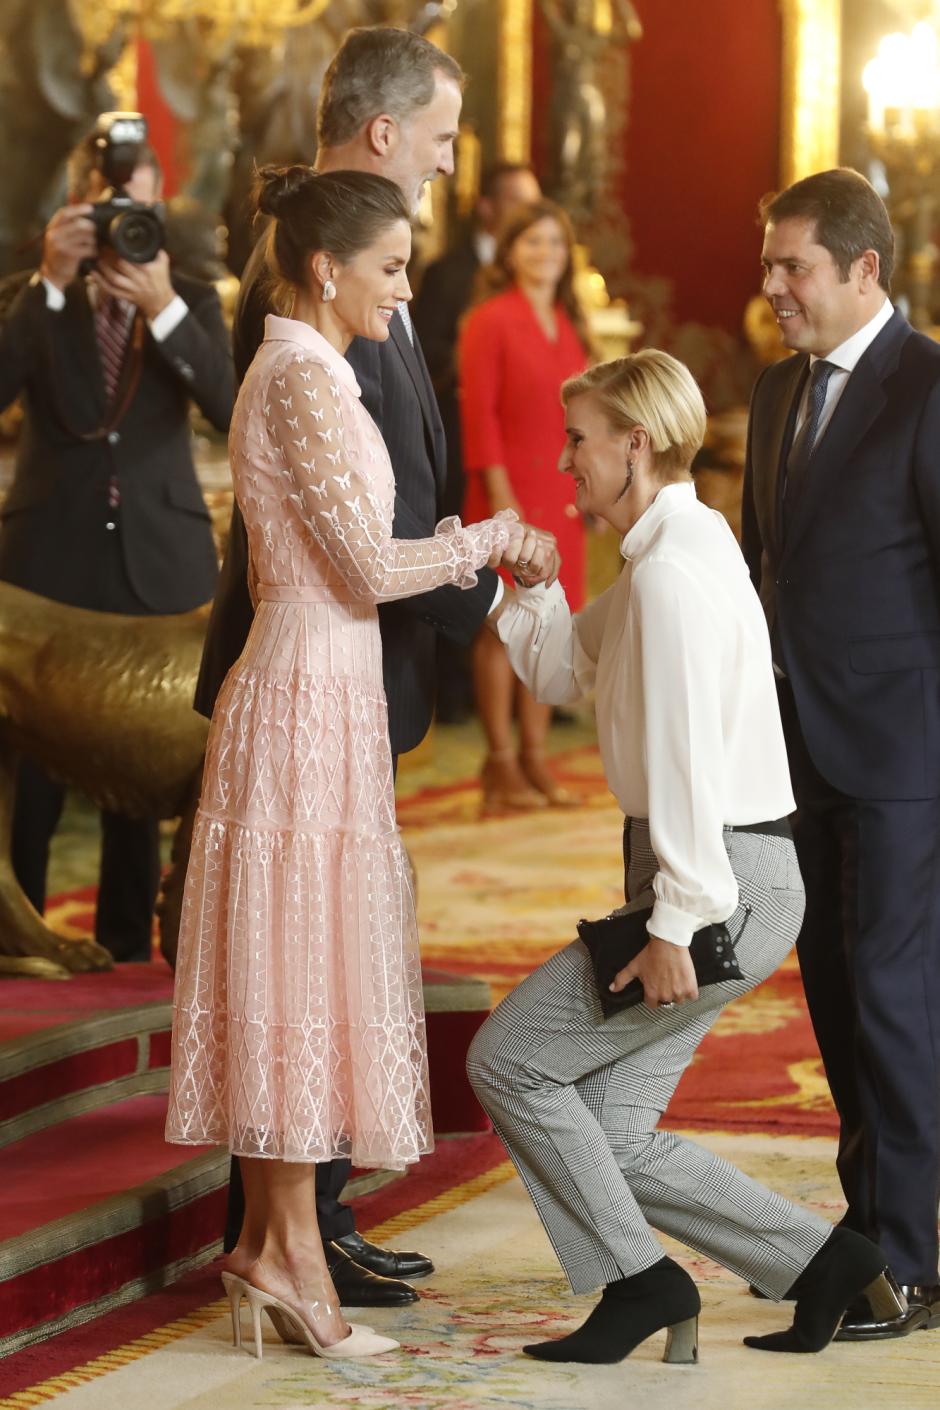 Spanish King Felipe VI and Queen Letizia Ortiz with Maria Zurita attending a reception at Royal Palace during the known as Dia de la Hispanidad, Spain's National Day, in Madrid, on Saturday 12nd October, 2019.